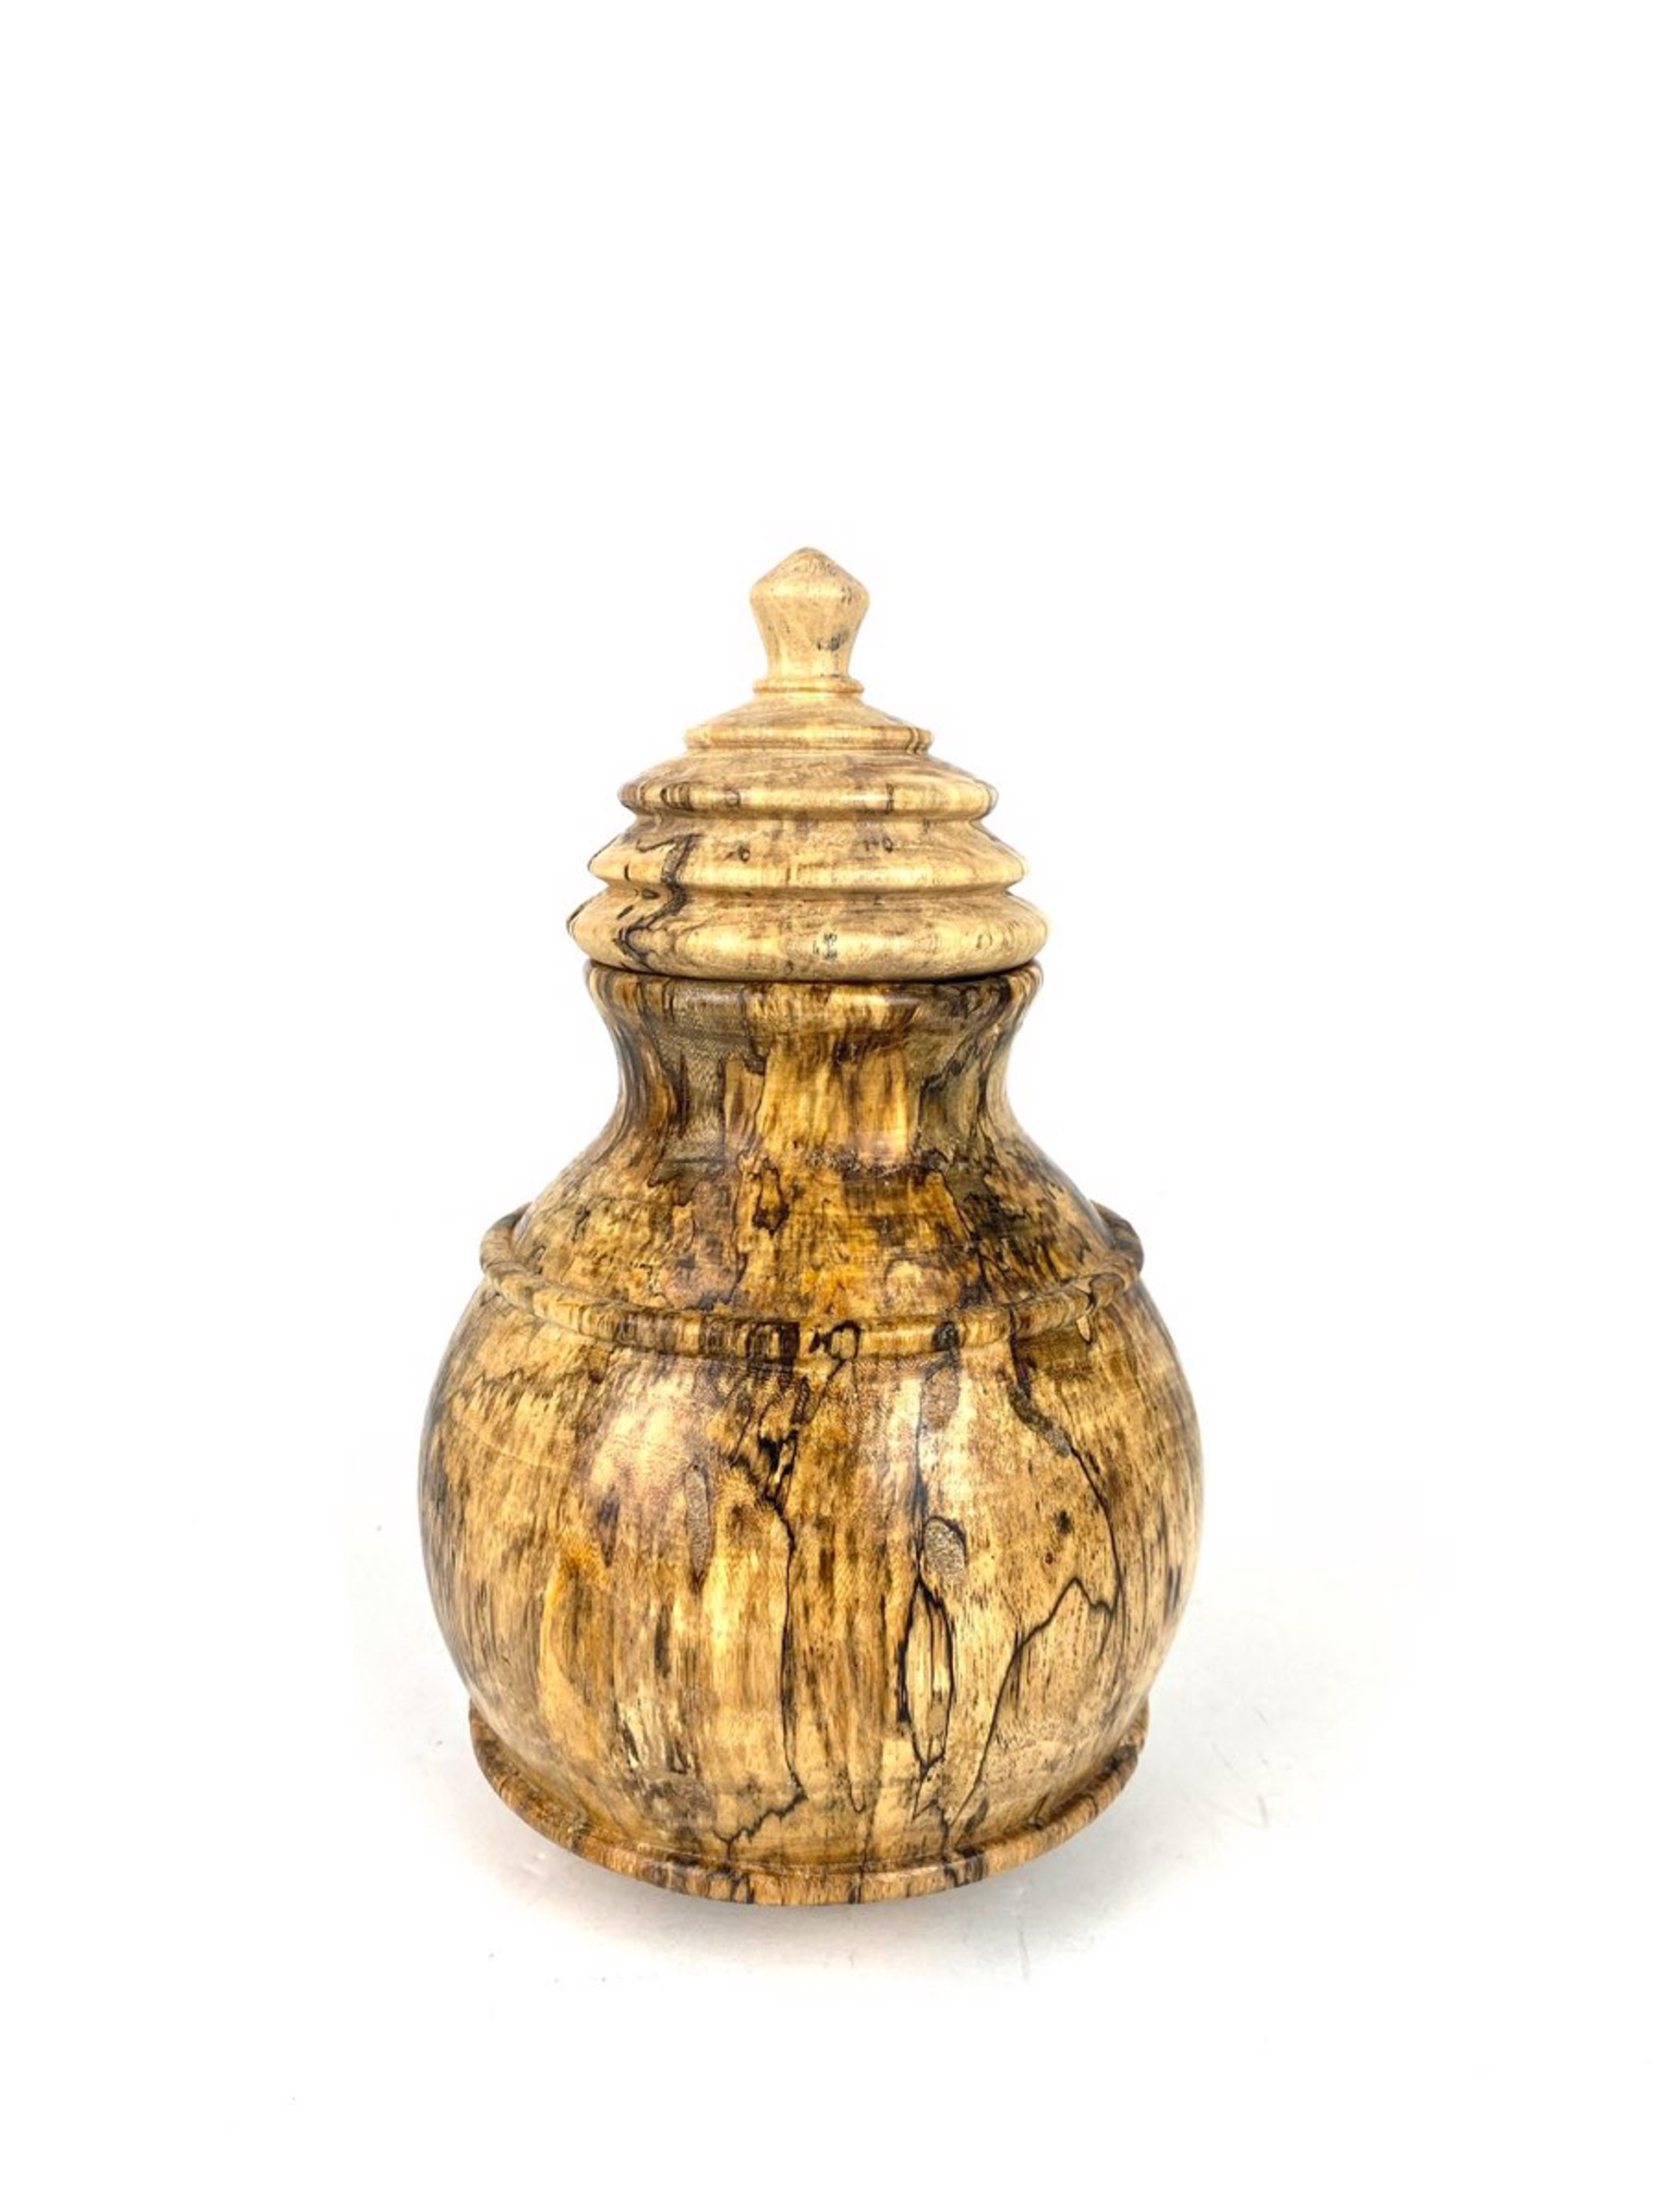 Dogwood Vase with Large Finial by Don Moore